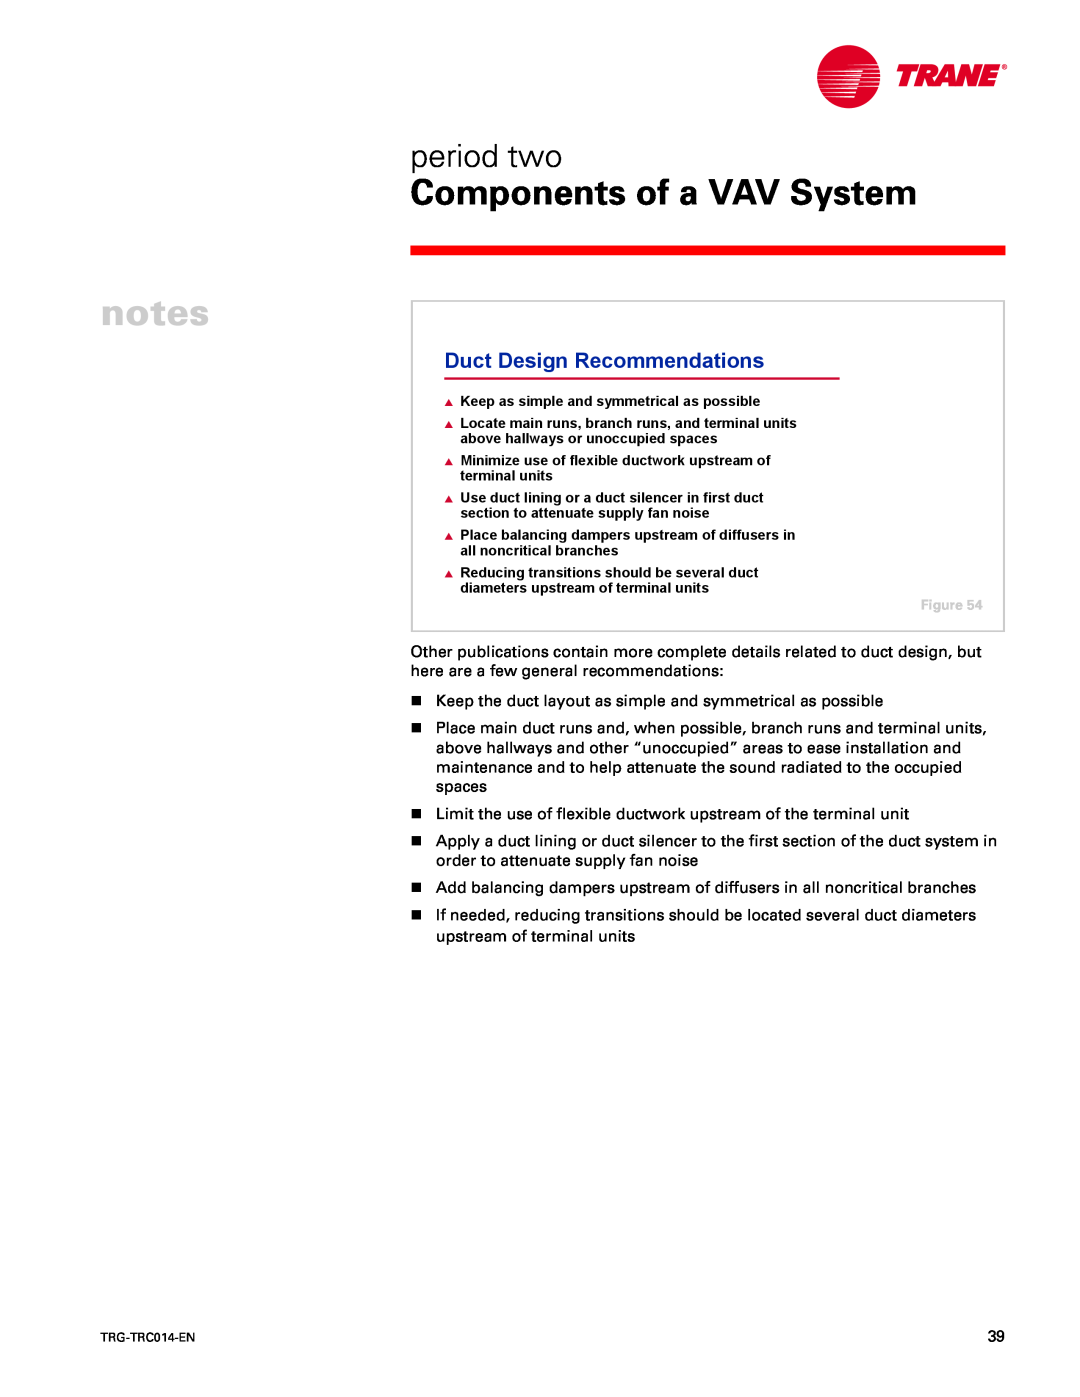 Trane TRG-TRC014-EN manual Duct Design Recommendations, Components of a VAV System, period two 